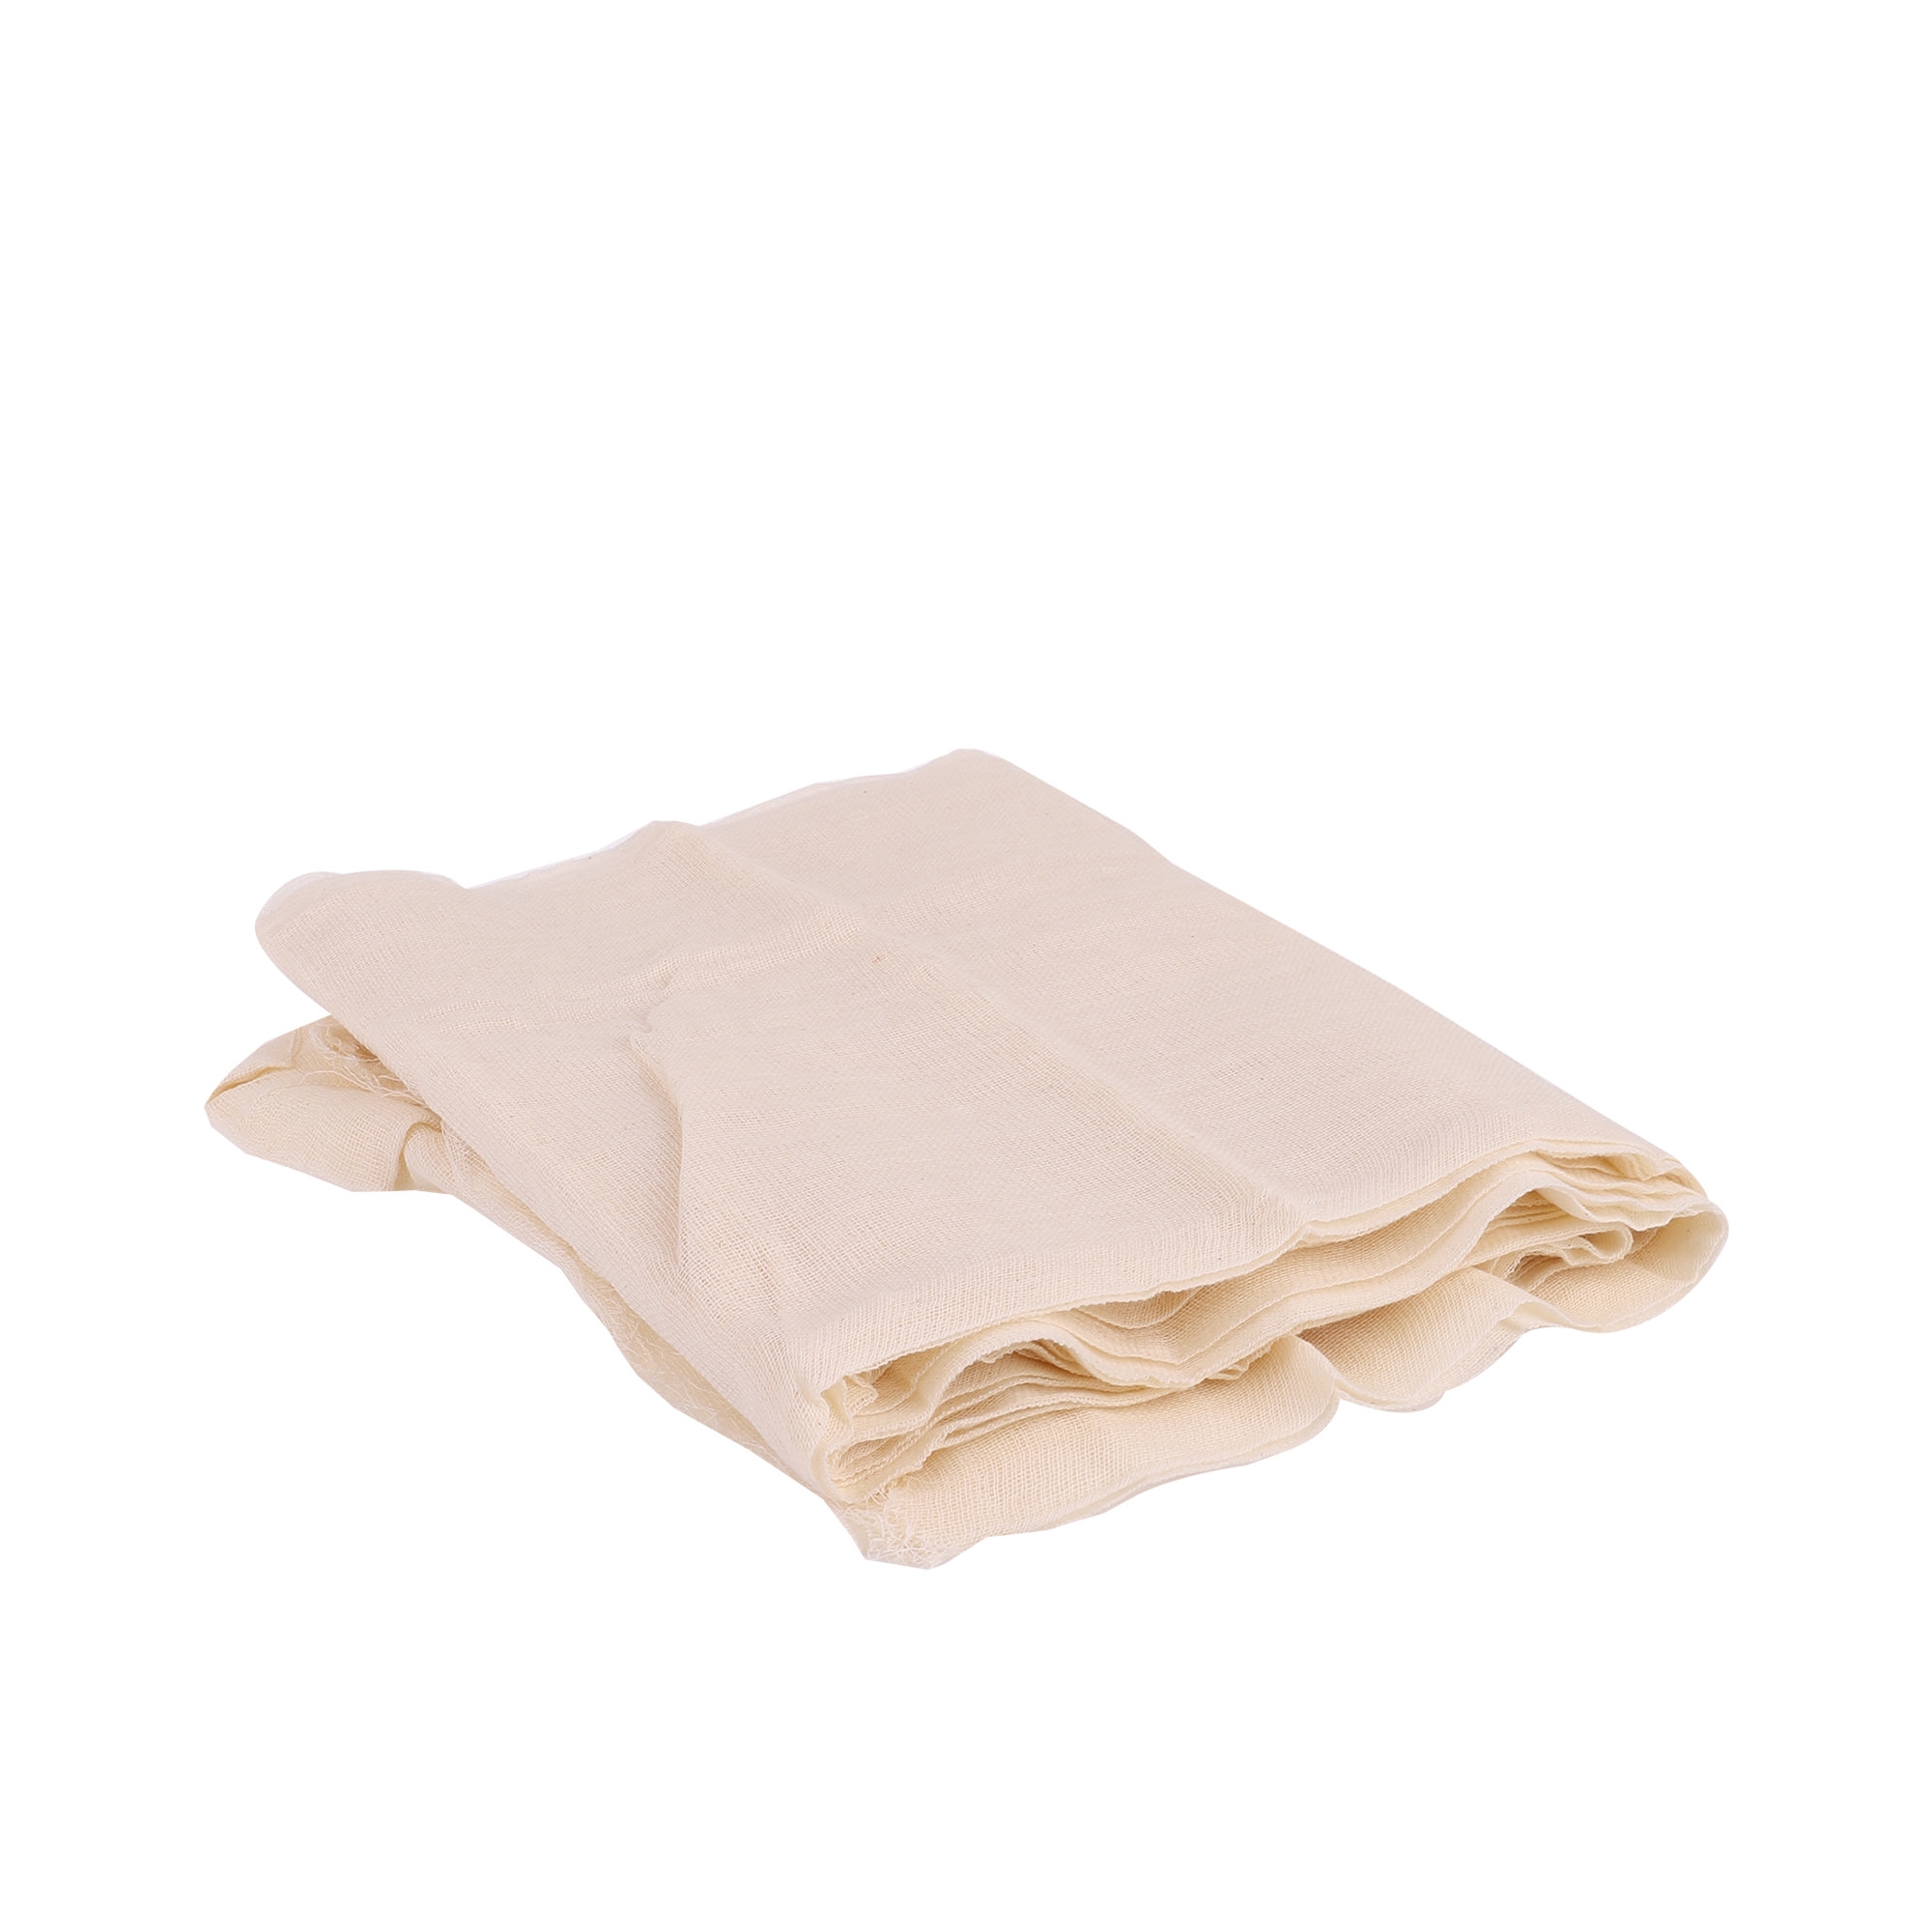 Appetito Cheesecloth Unbleached Image 2